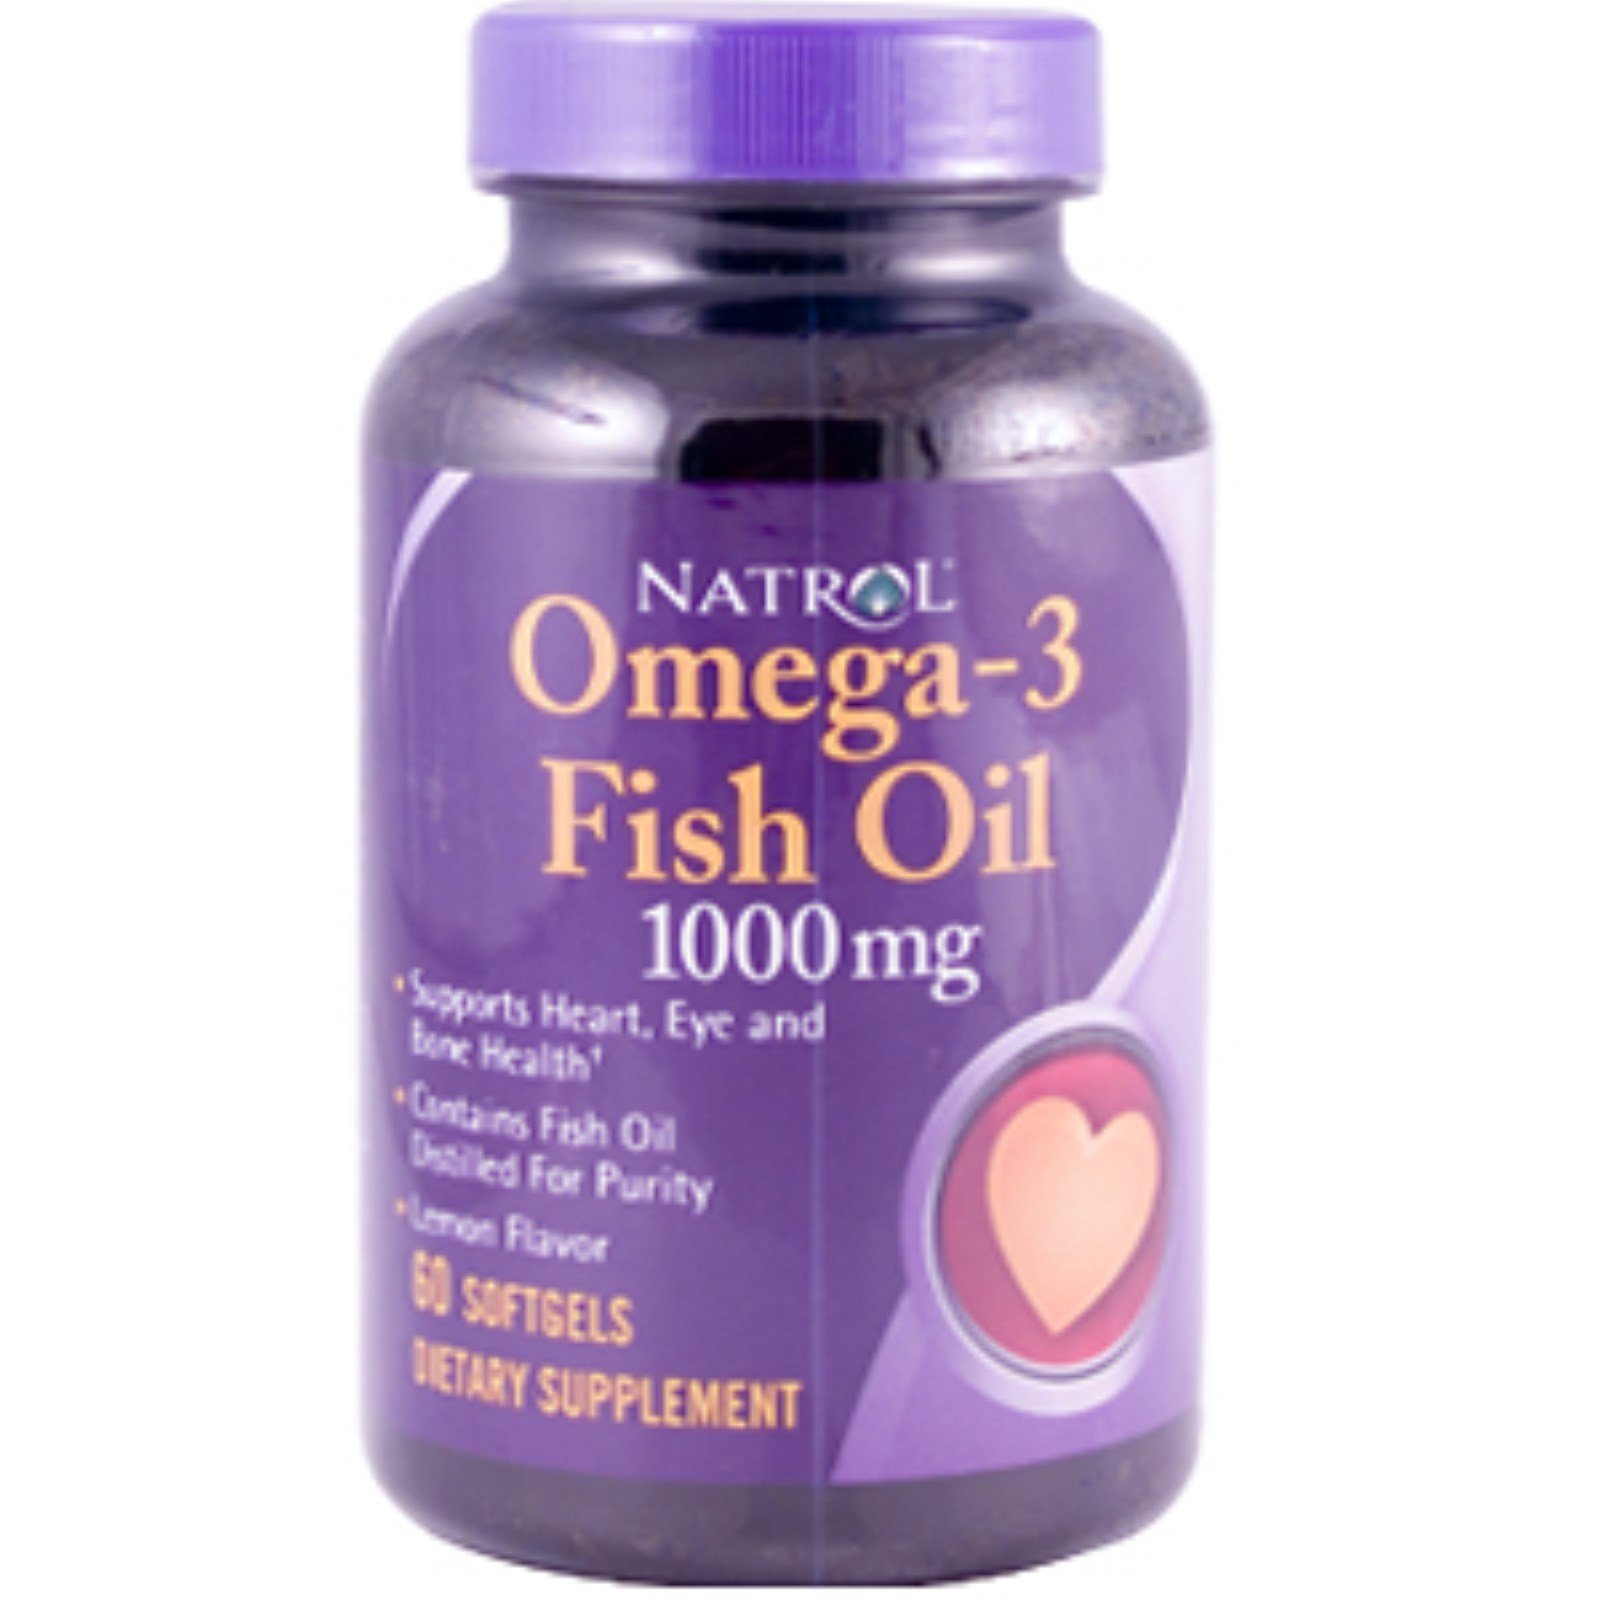 Omega-3 Fish Oil 1000 mg, 60 piezas, Natrol. Omega 3 (Aceite de pescado). General Health Ligament and Joint strengthening Skin health CVD Prevention Anti-inflammatory properties 